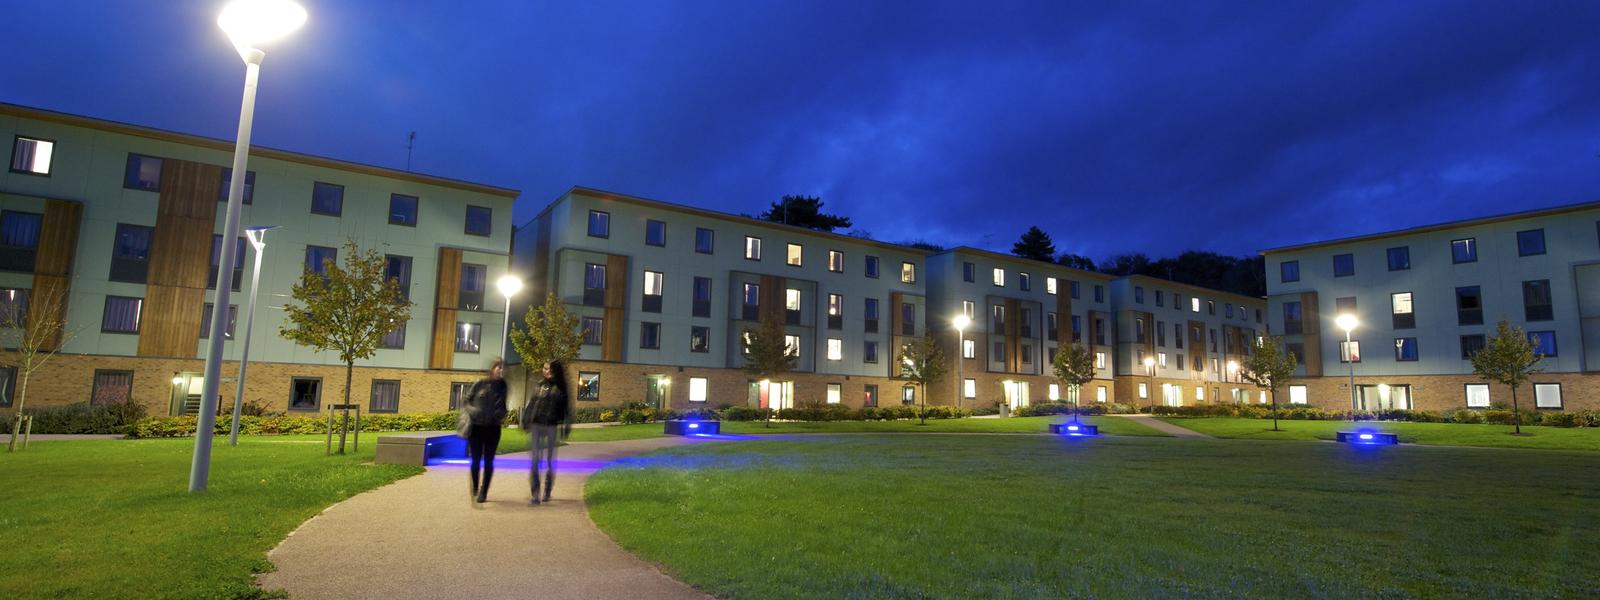 Two students walk along a path on campus at night with student accommodation in the background.